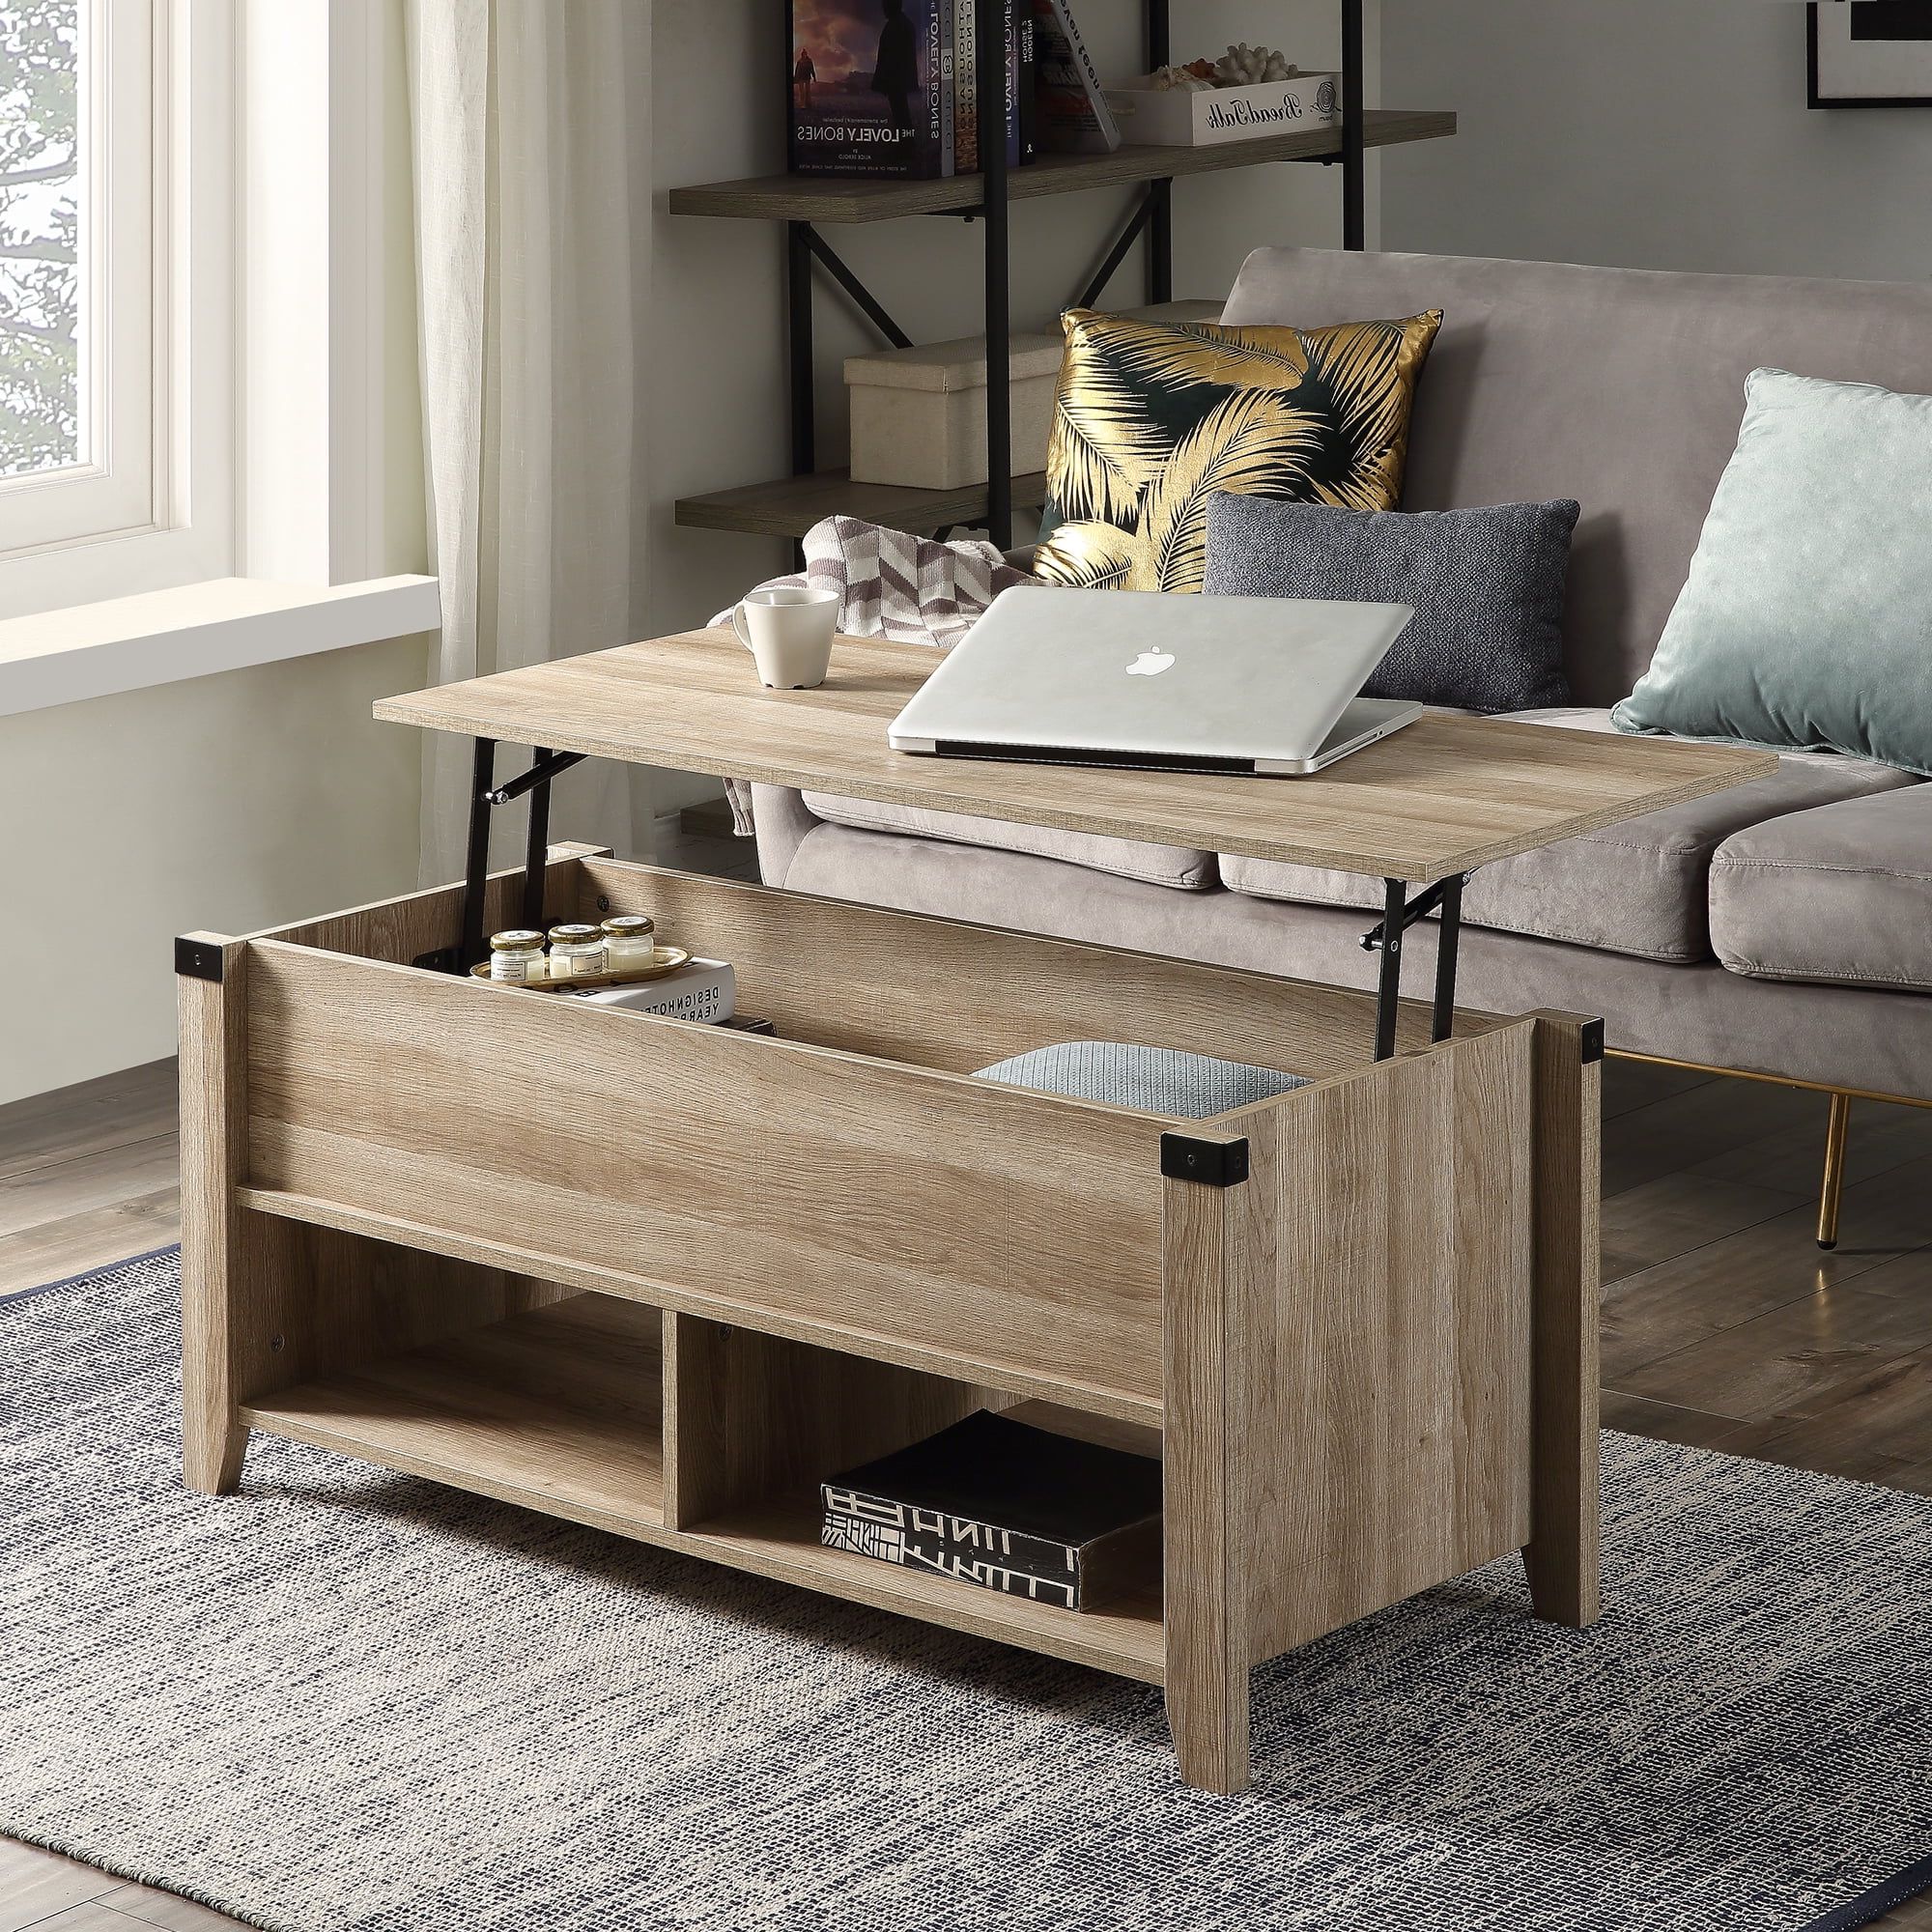 Multipurpose Coffee Table With Drawers ,open Shelf And Storage, Lifting Intended For Current Coffee Tables With Open Storage Shelves (View 2 of 15)